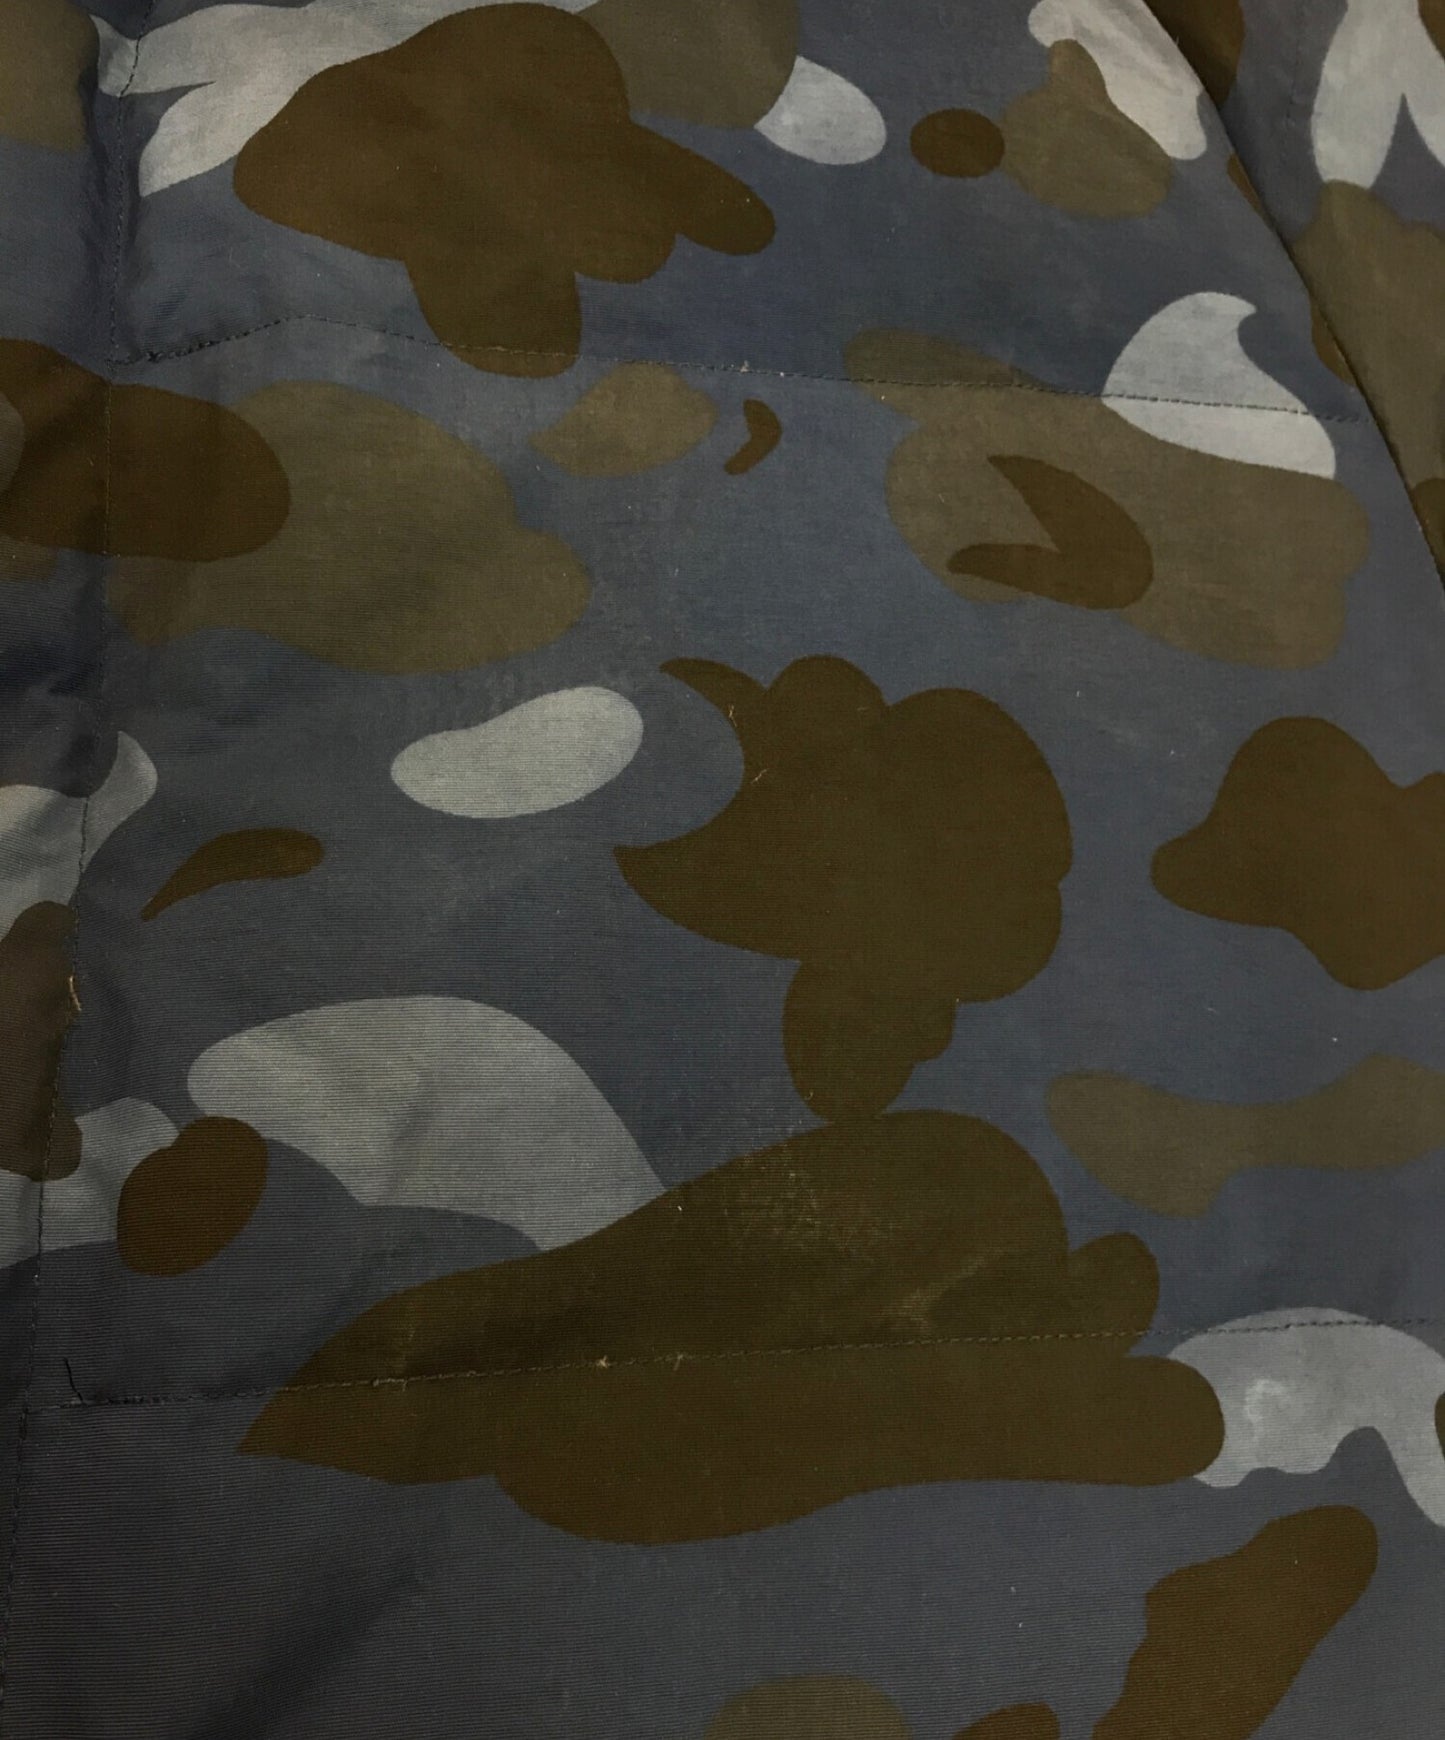 [Pre-owned] A BATHING APE Sal Camo Patterned Down Jacket Down Jacket Cotton Jacket Jacket